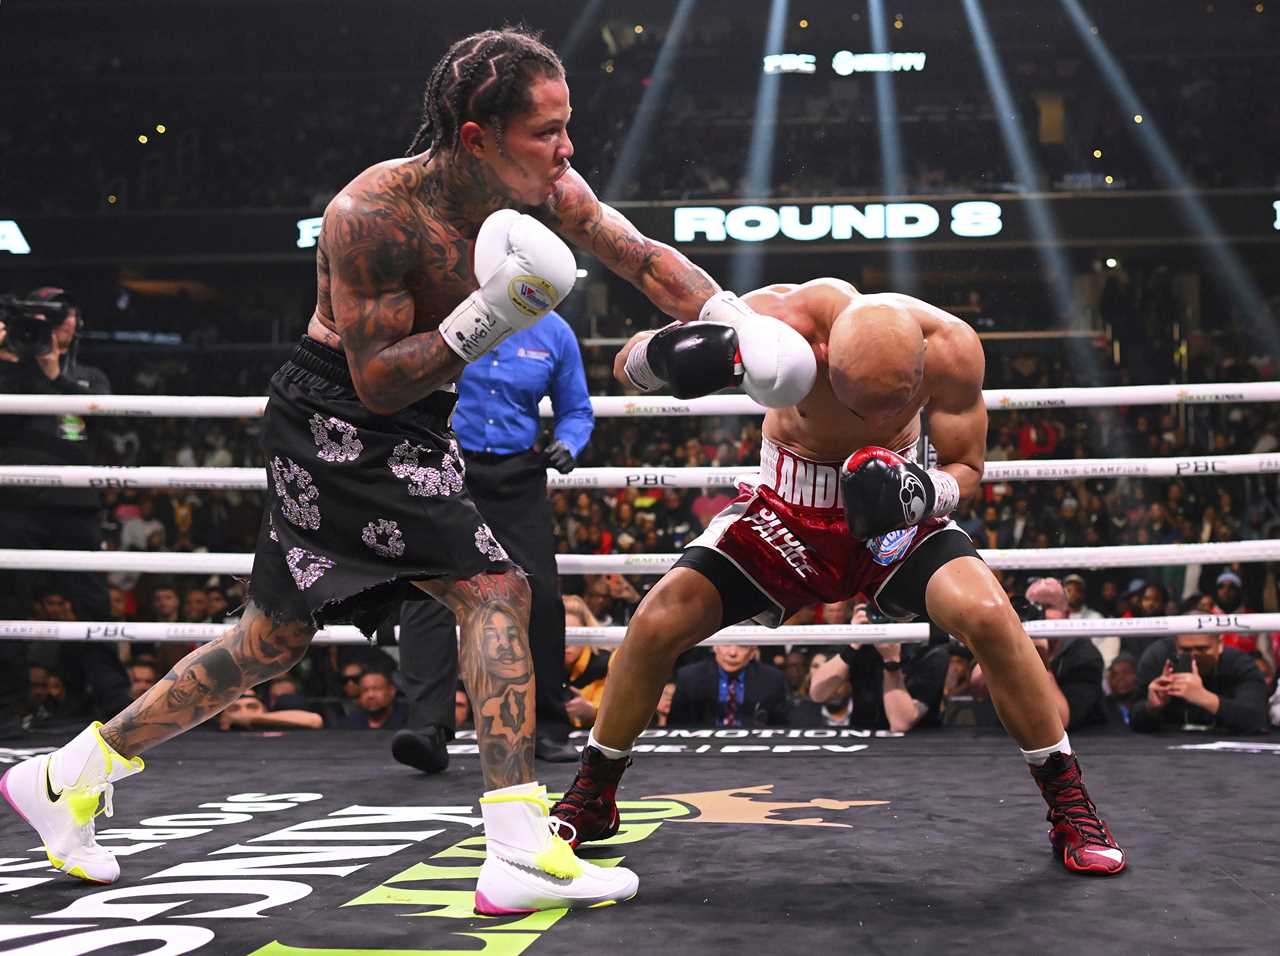 Gervonta is becoming a mini-monster bent on taking Mike Tyson's title as boxing's Baddest Man On The Planet.